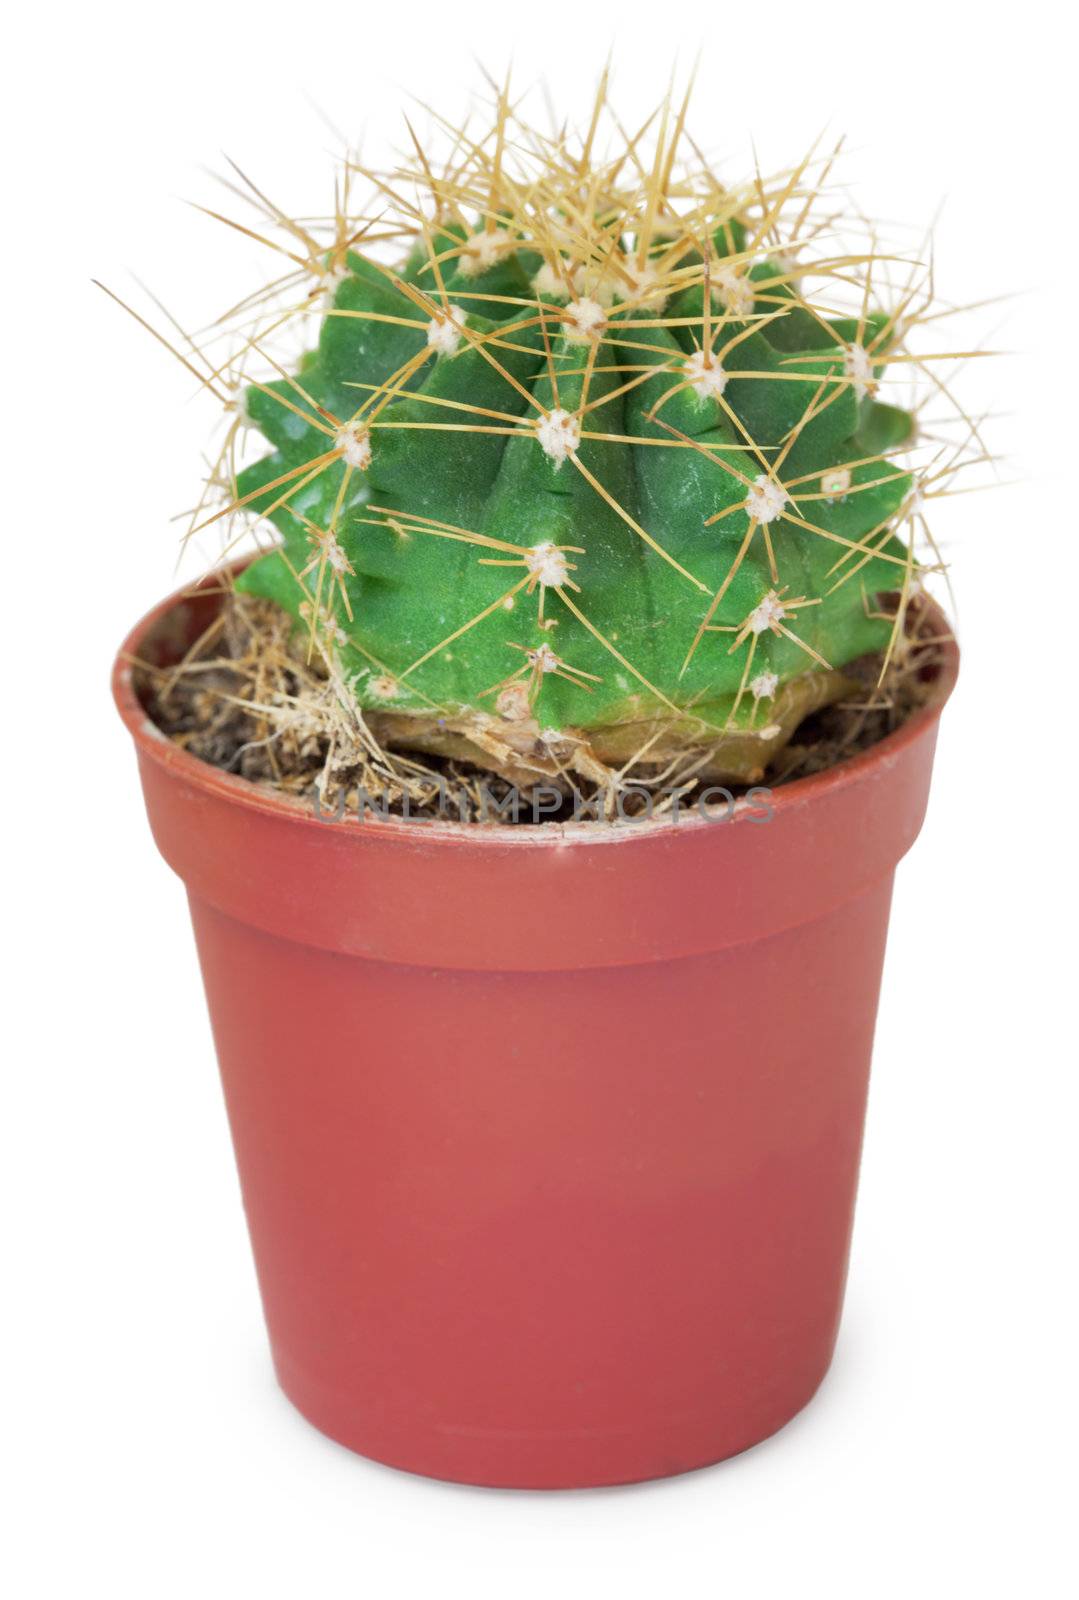 The small round cactus in a brown pot